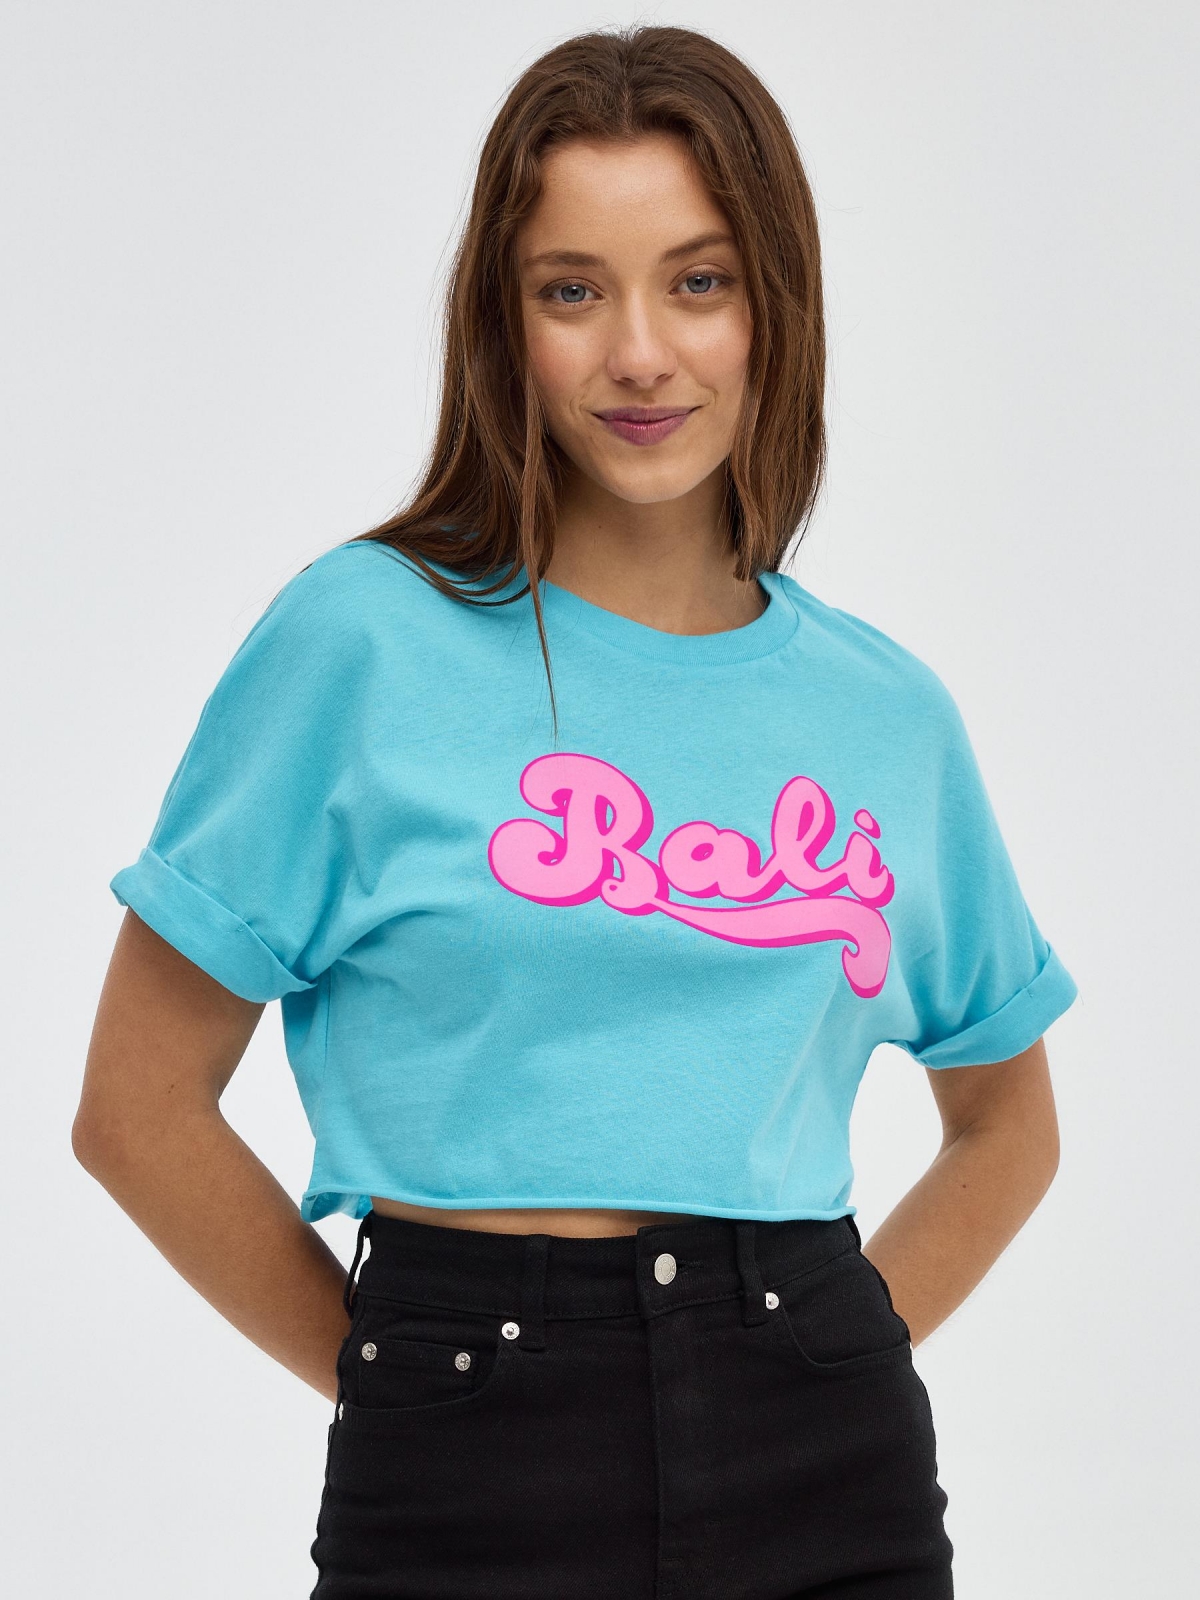 Bali crop top blue middle front view